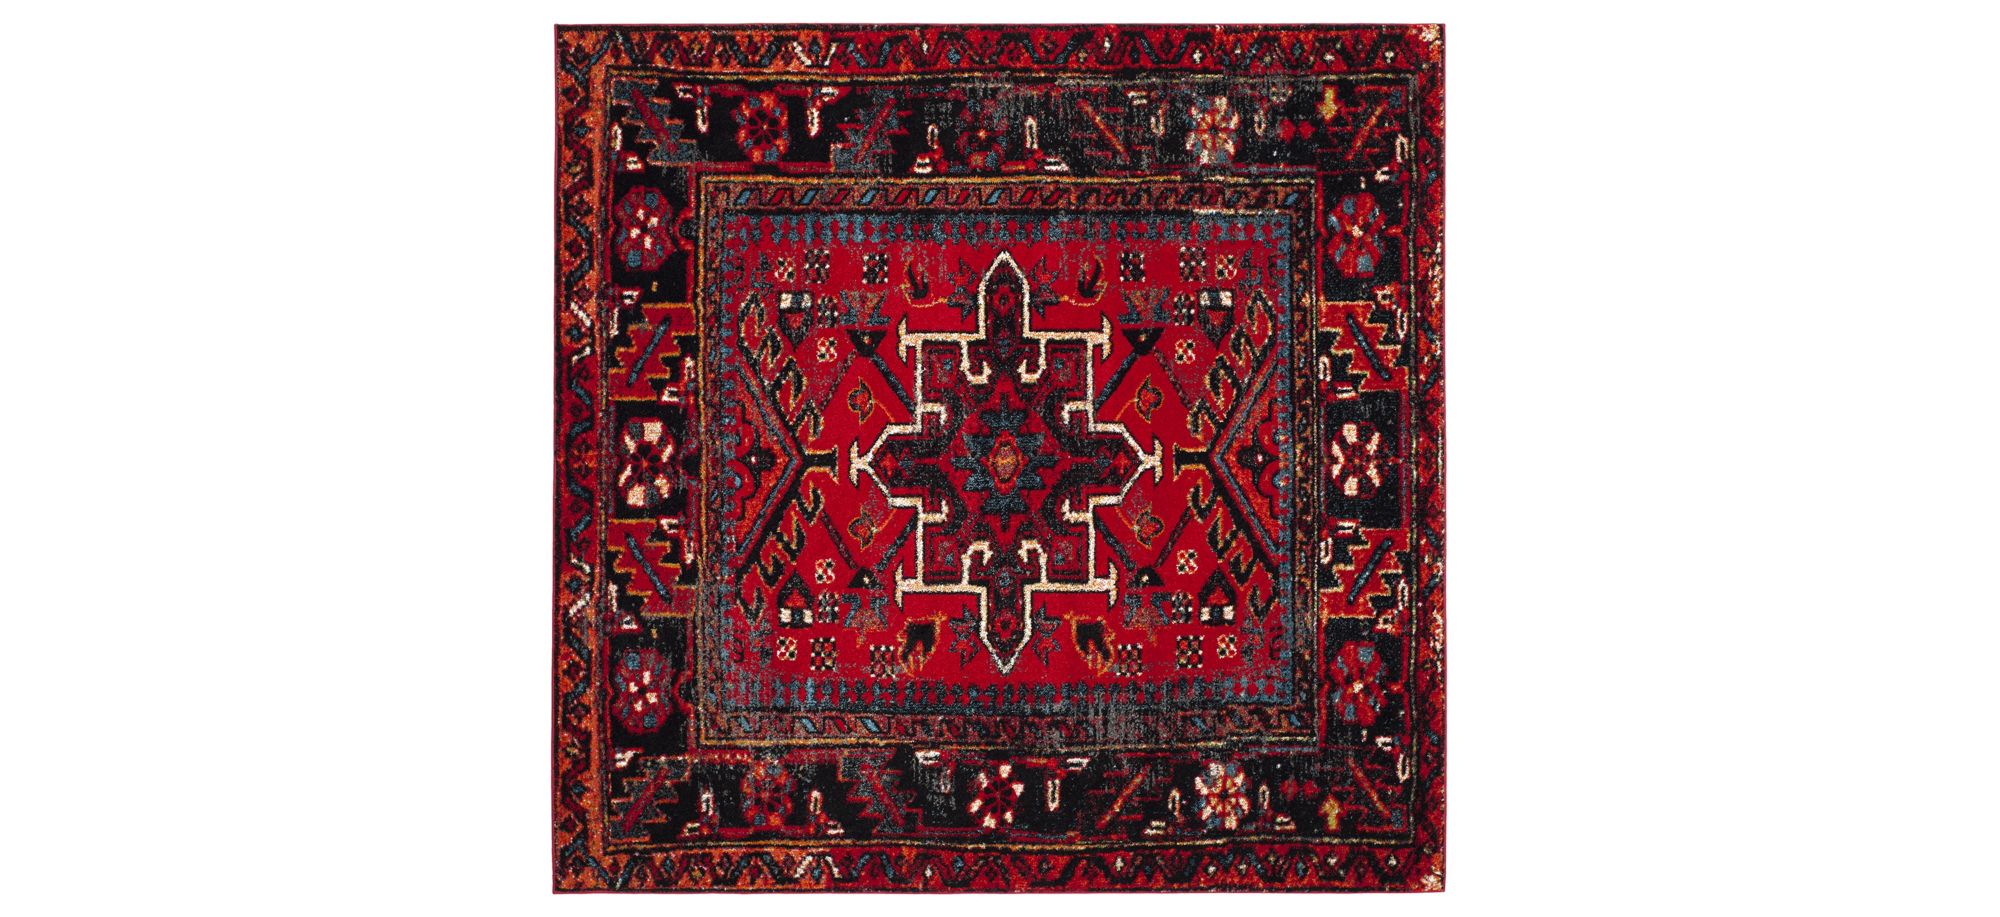 Darius Red Area Rug in Red by Safavieh